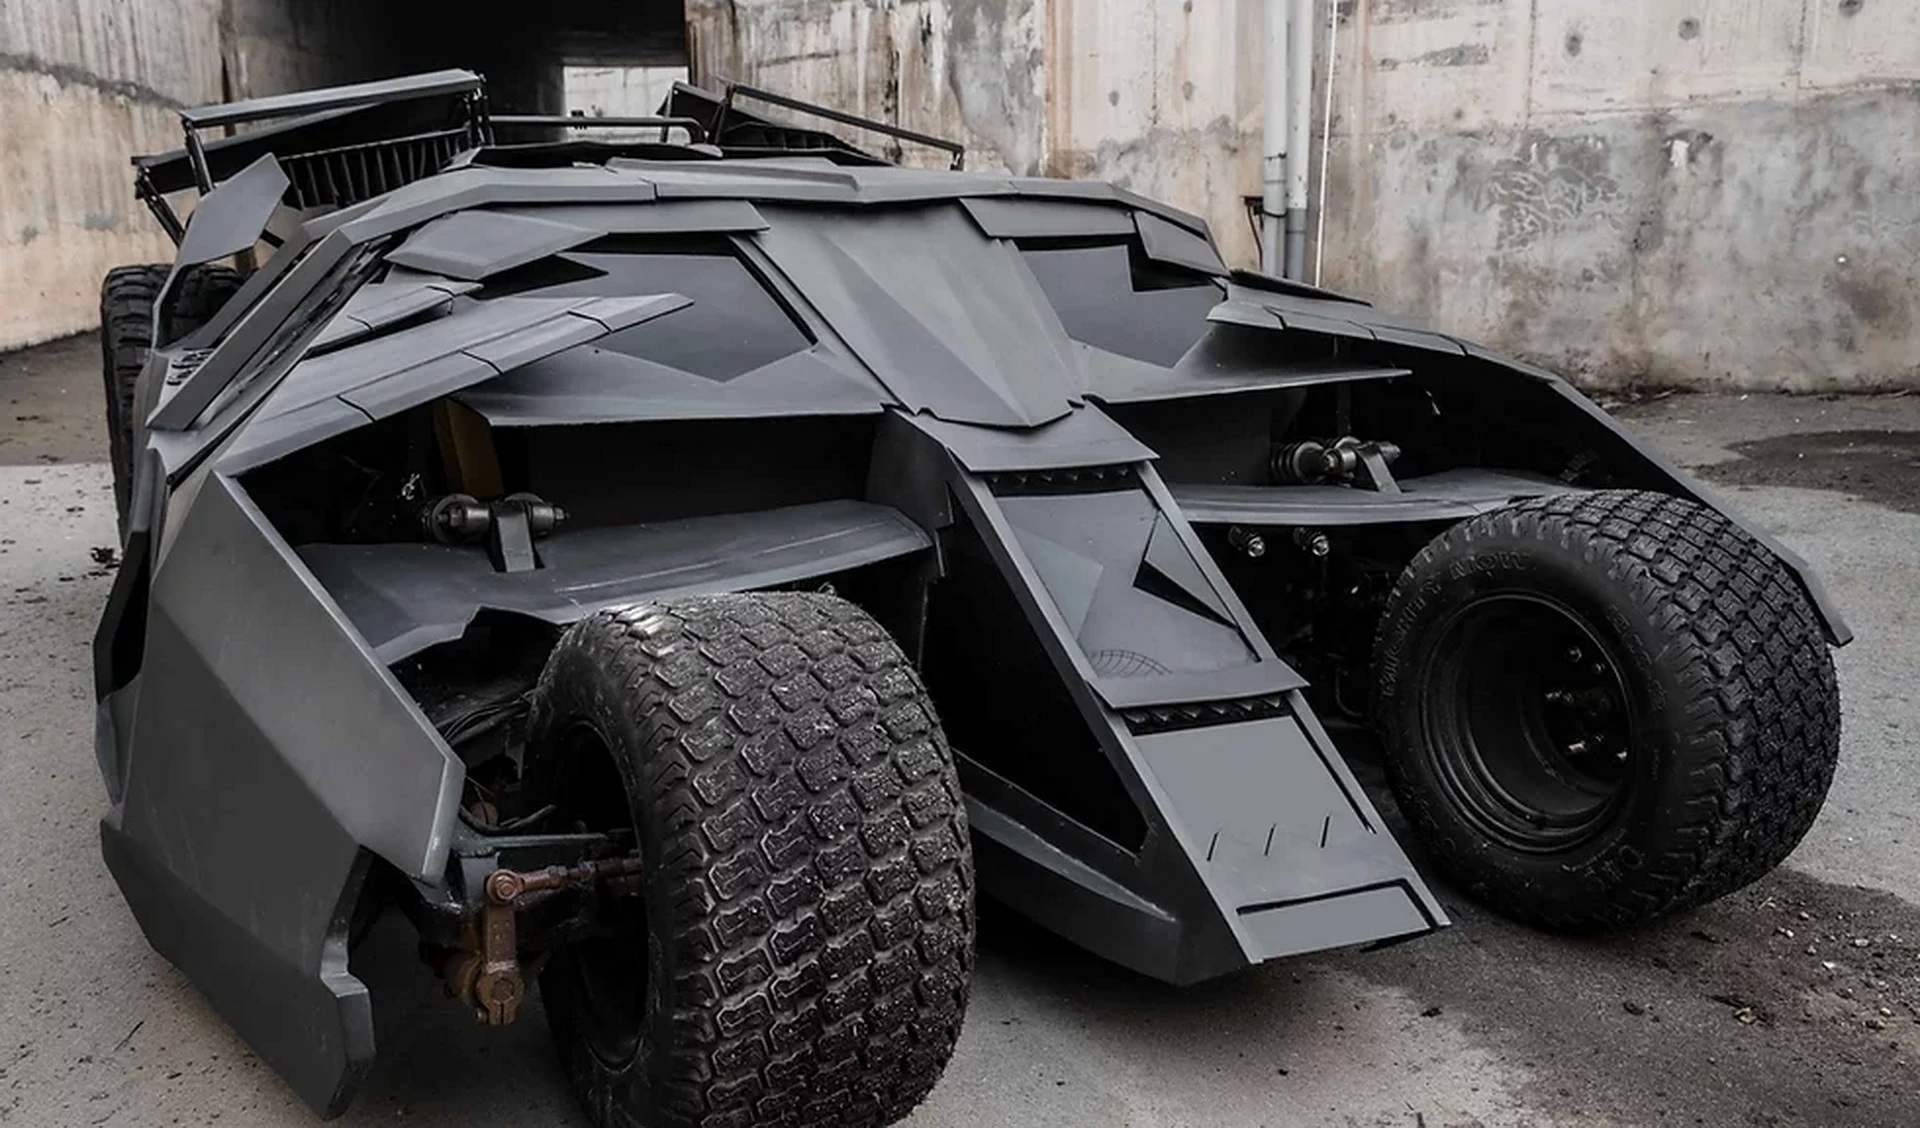 https://www.carscoops.com/wp-content/uploads/2022/02/The-Electric-Batmobile-1.jpg